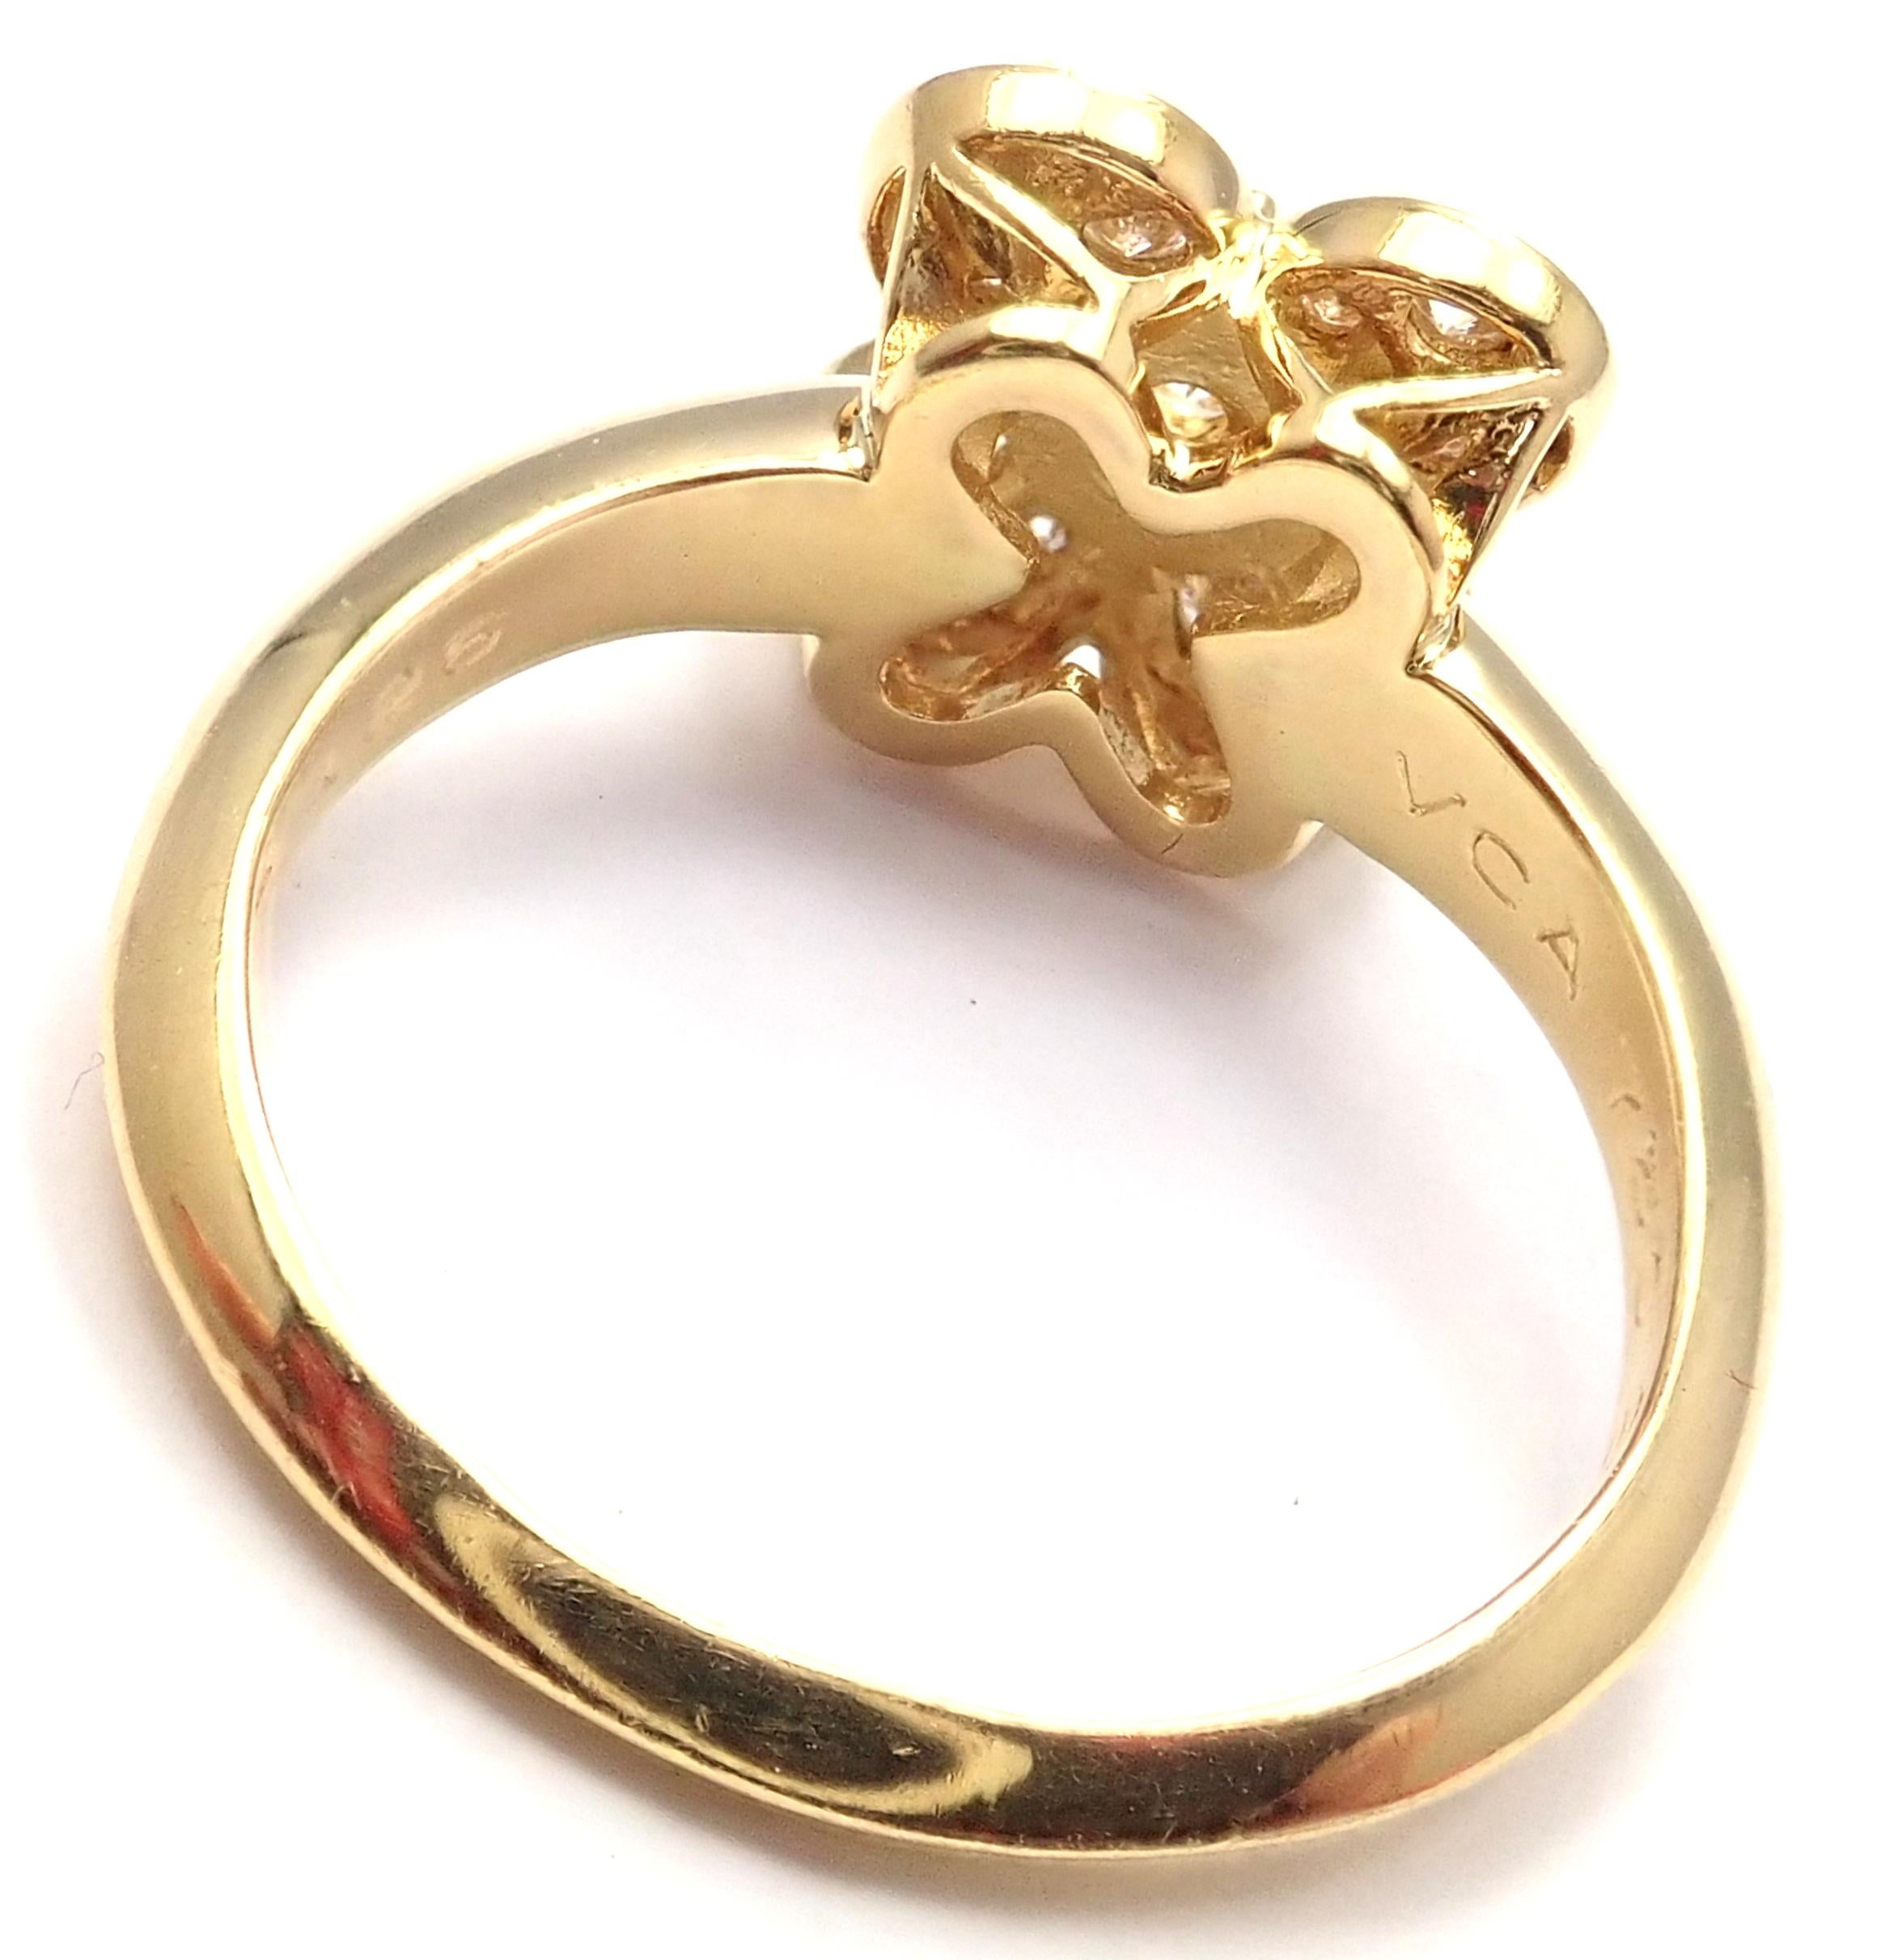 Van Cleef & Arpels Trefle Clover Diamond Yellow Gold Ring In Excellent Condition For Sale In Holland, PA